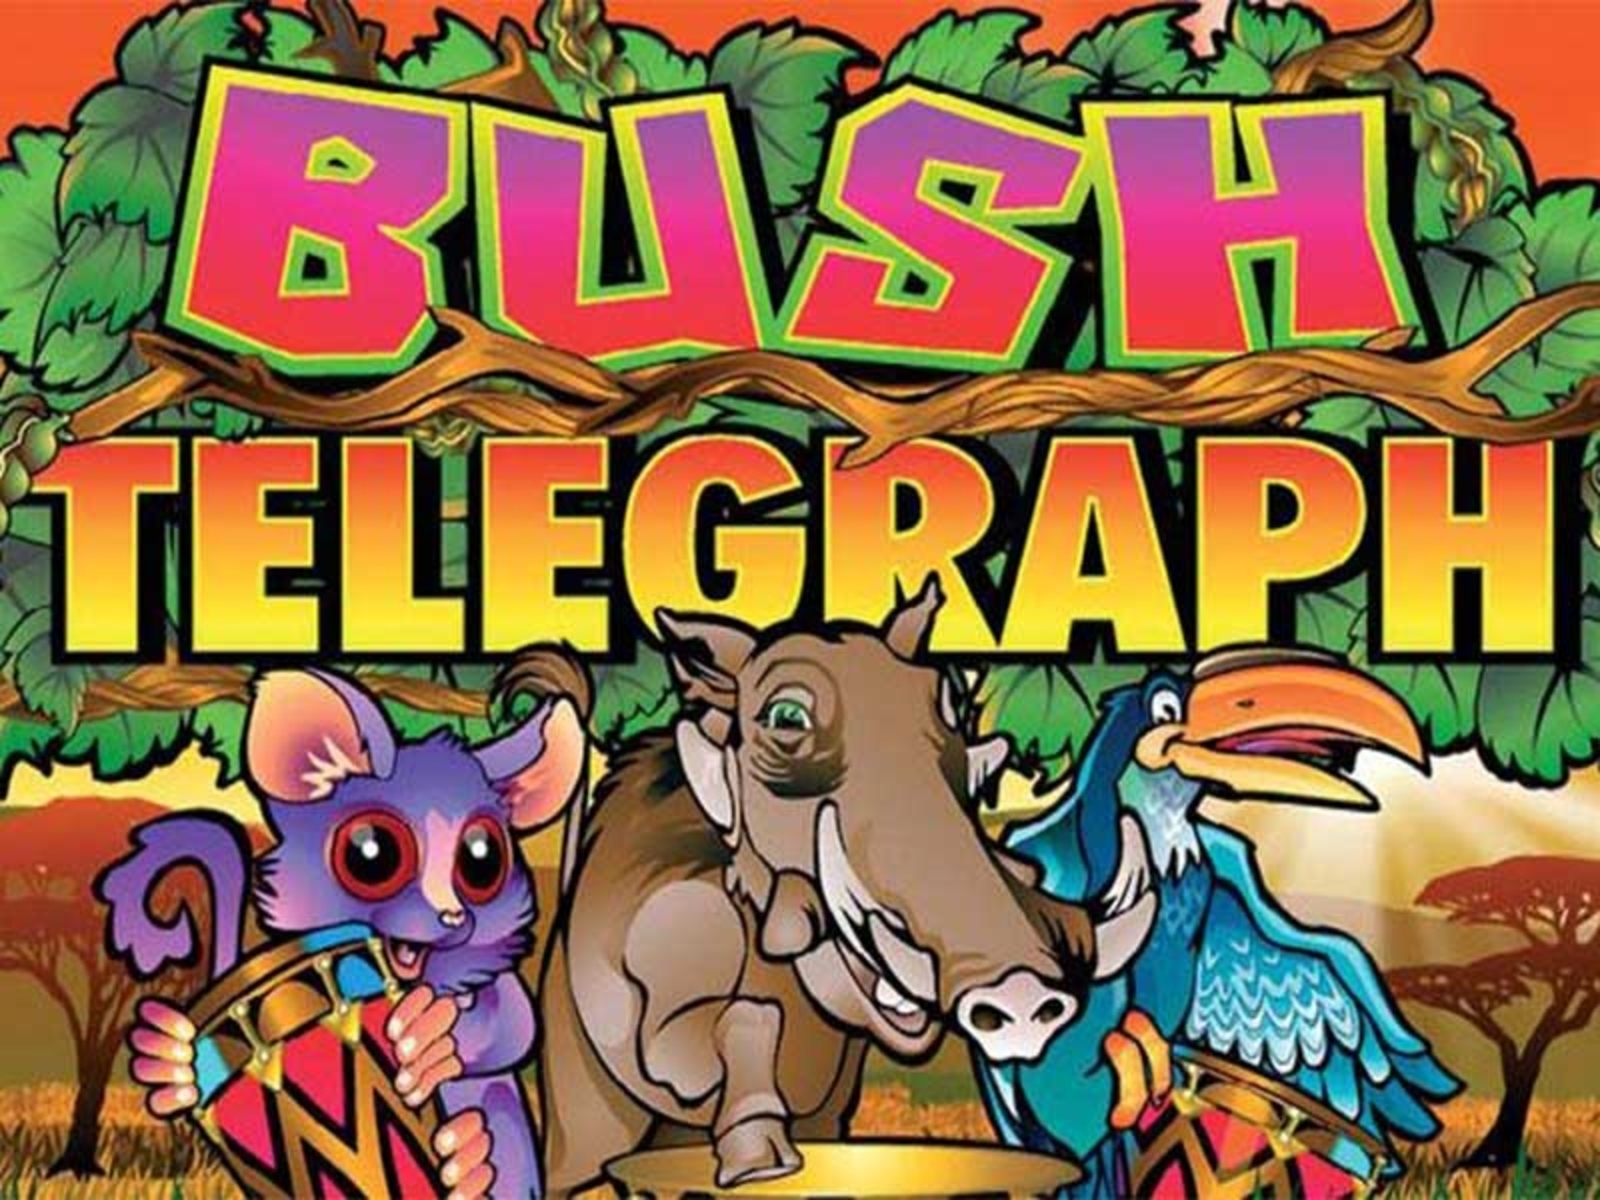 The Bush Telegraph Online Slot Demo Game by Microgaming